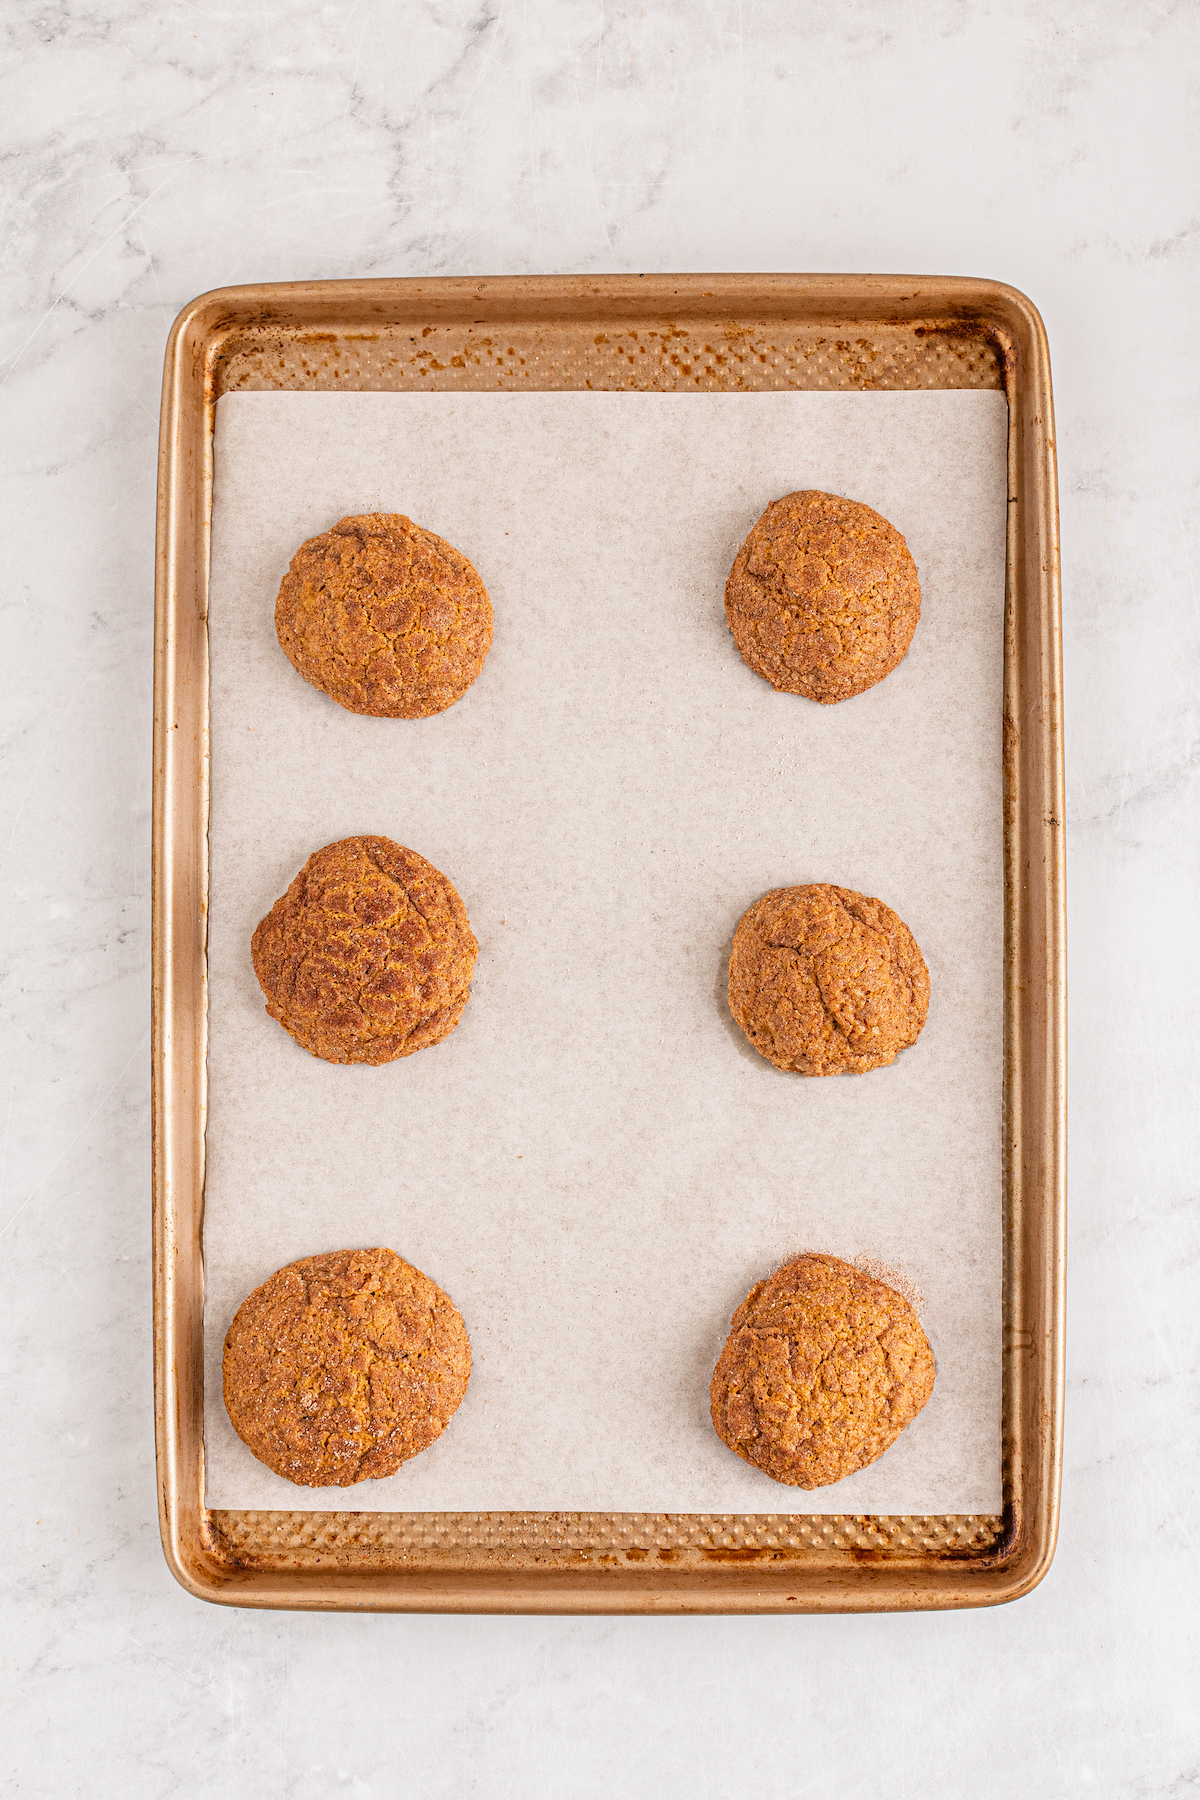 Pumpkin Cookies on a parchment lined baking sheet fresh out of the oven.